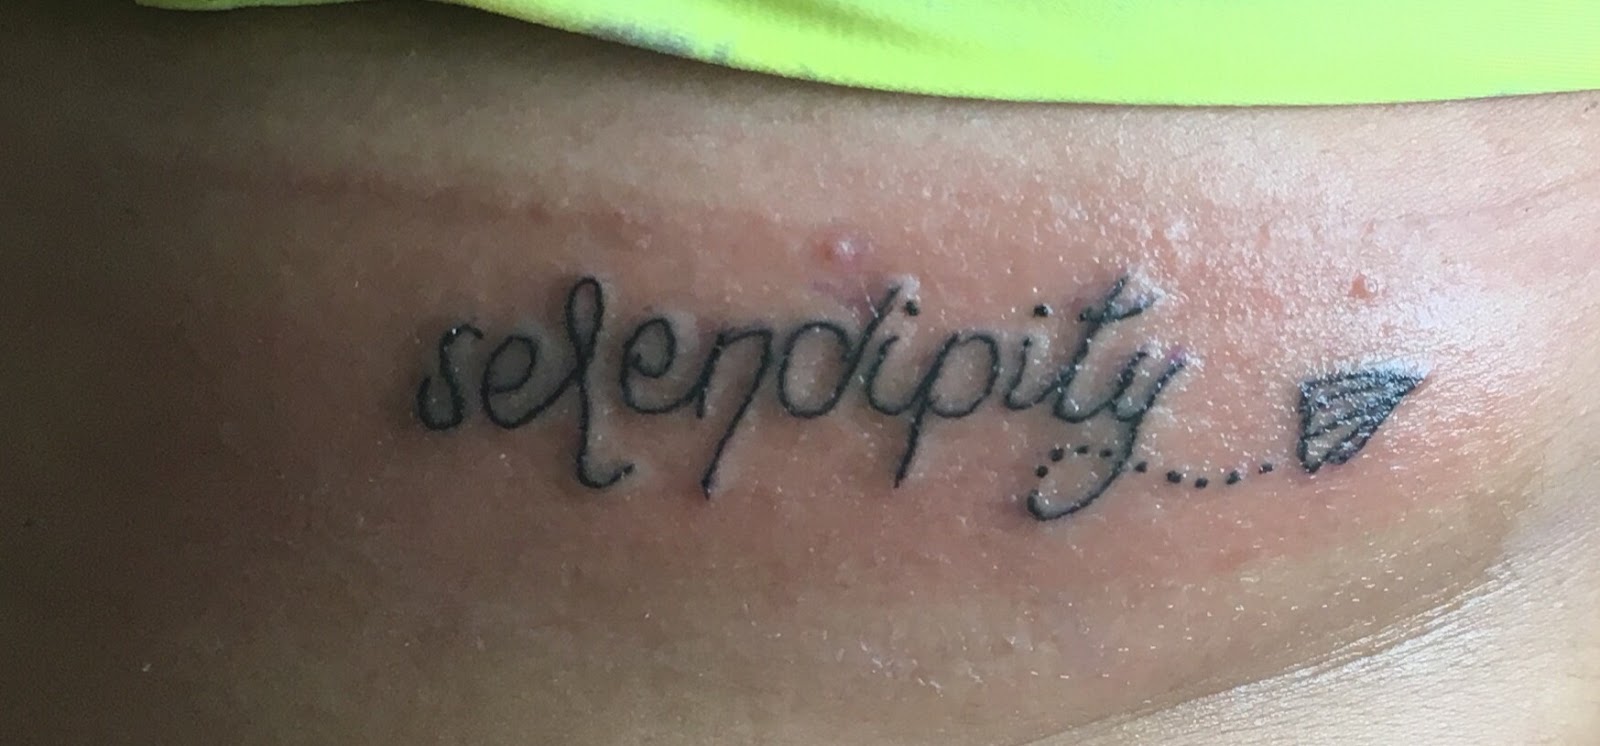 Idle tuesday afternoon thoughts: The Serendipity Tattoo